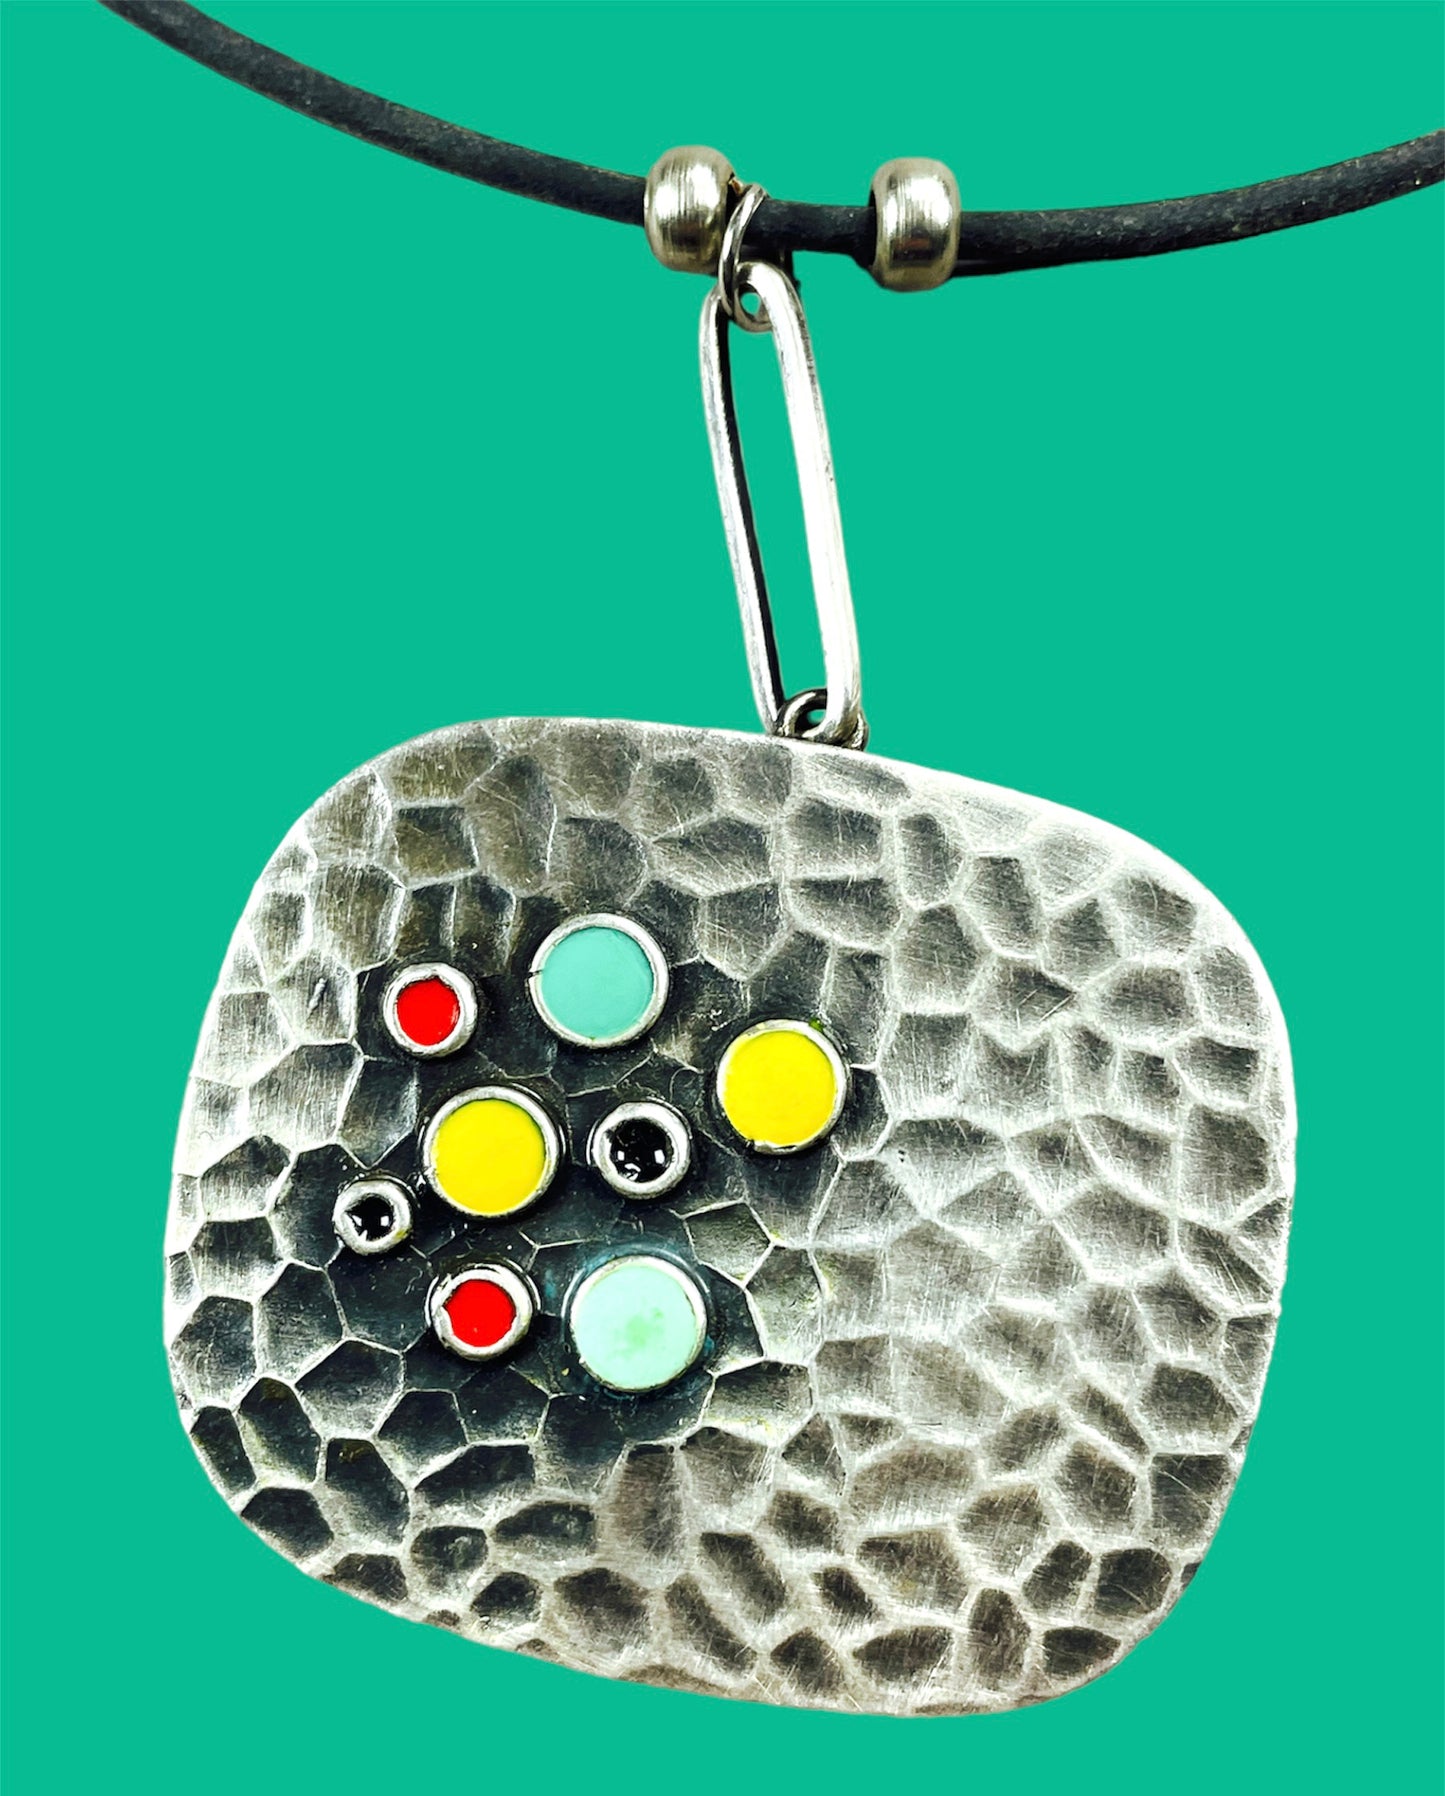 Whimsical "Bubbles" rounded rectangular plate, hammered silver metal with eight colored dots red/black/yellow/mint